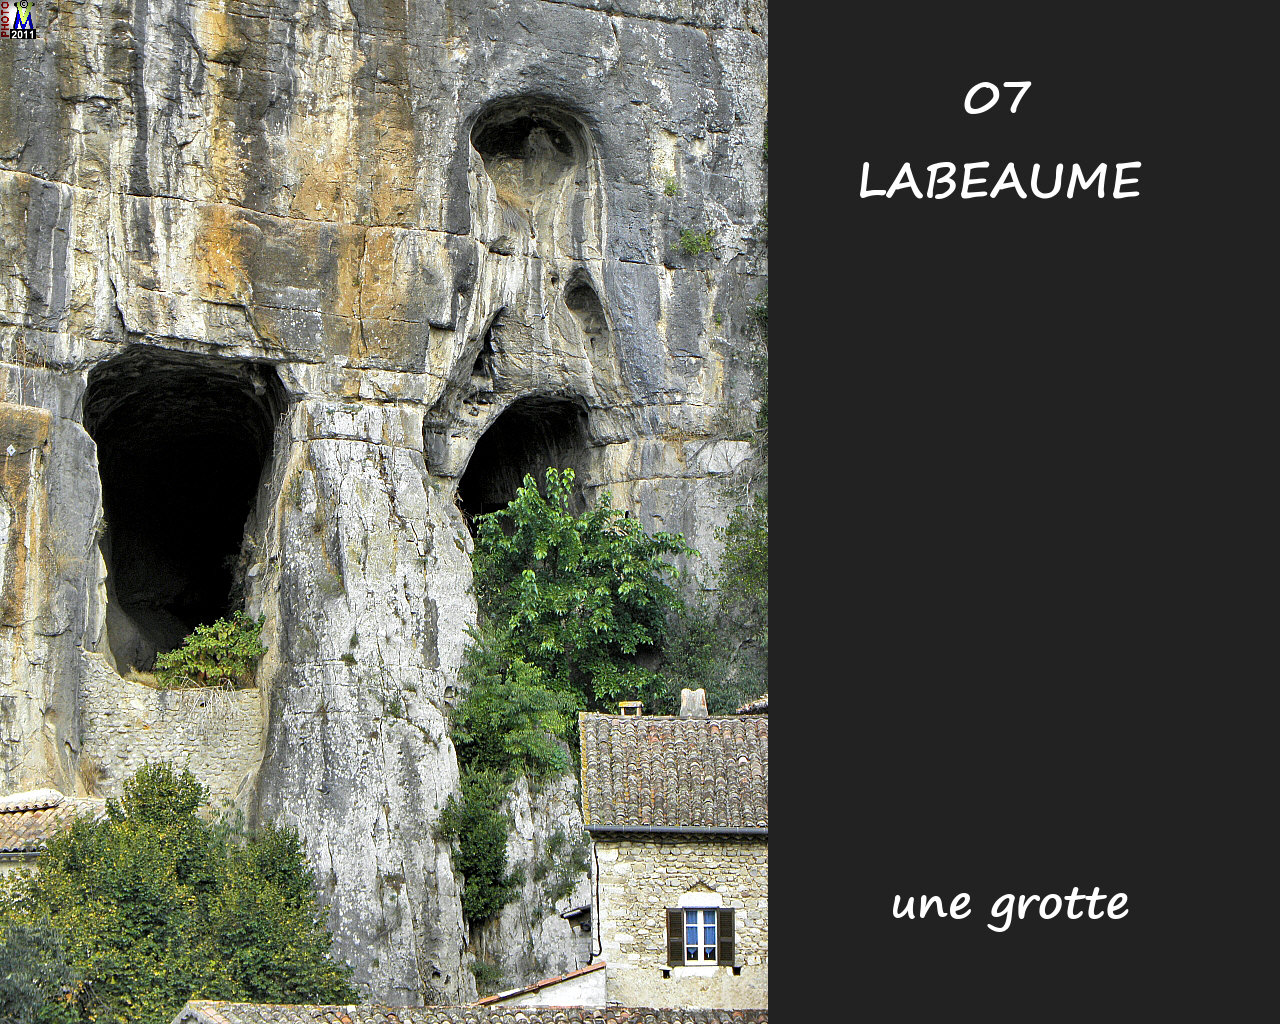 07LABEAUME_grotte_100.jpg